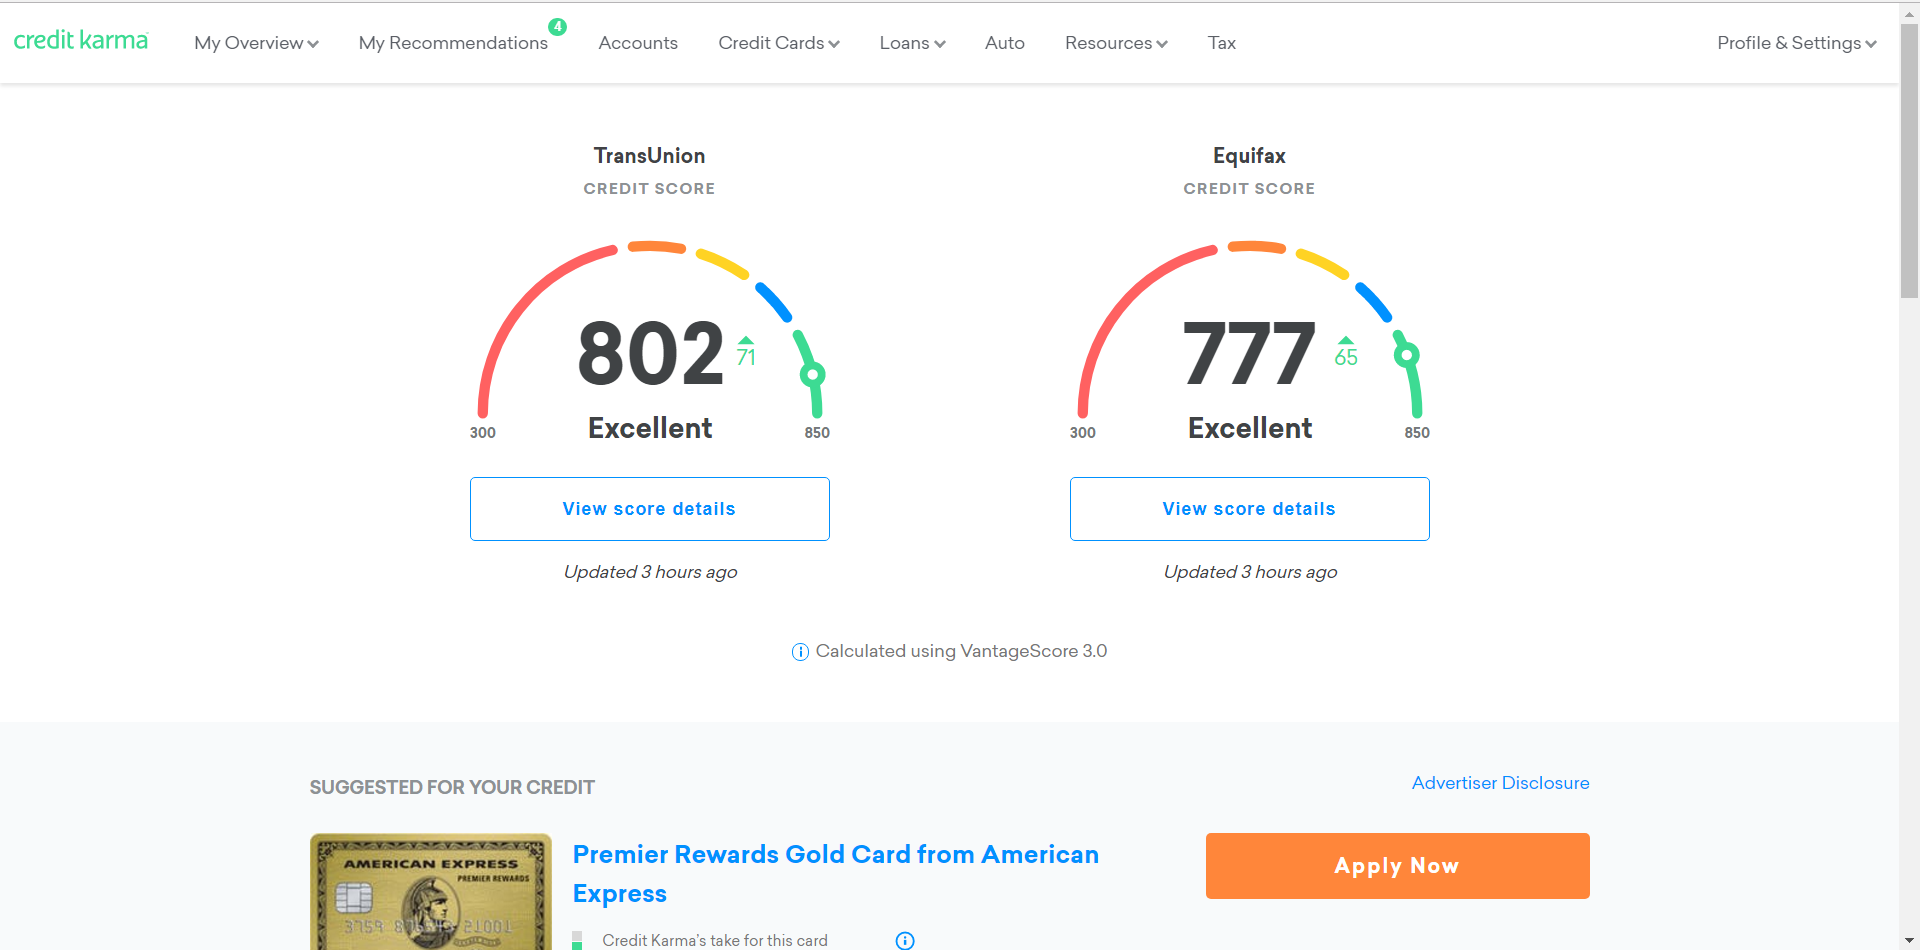 Is Credit Karma Safe? Are Their Credit Scores Accurate? (2020)